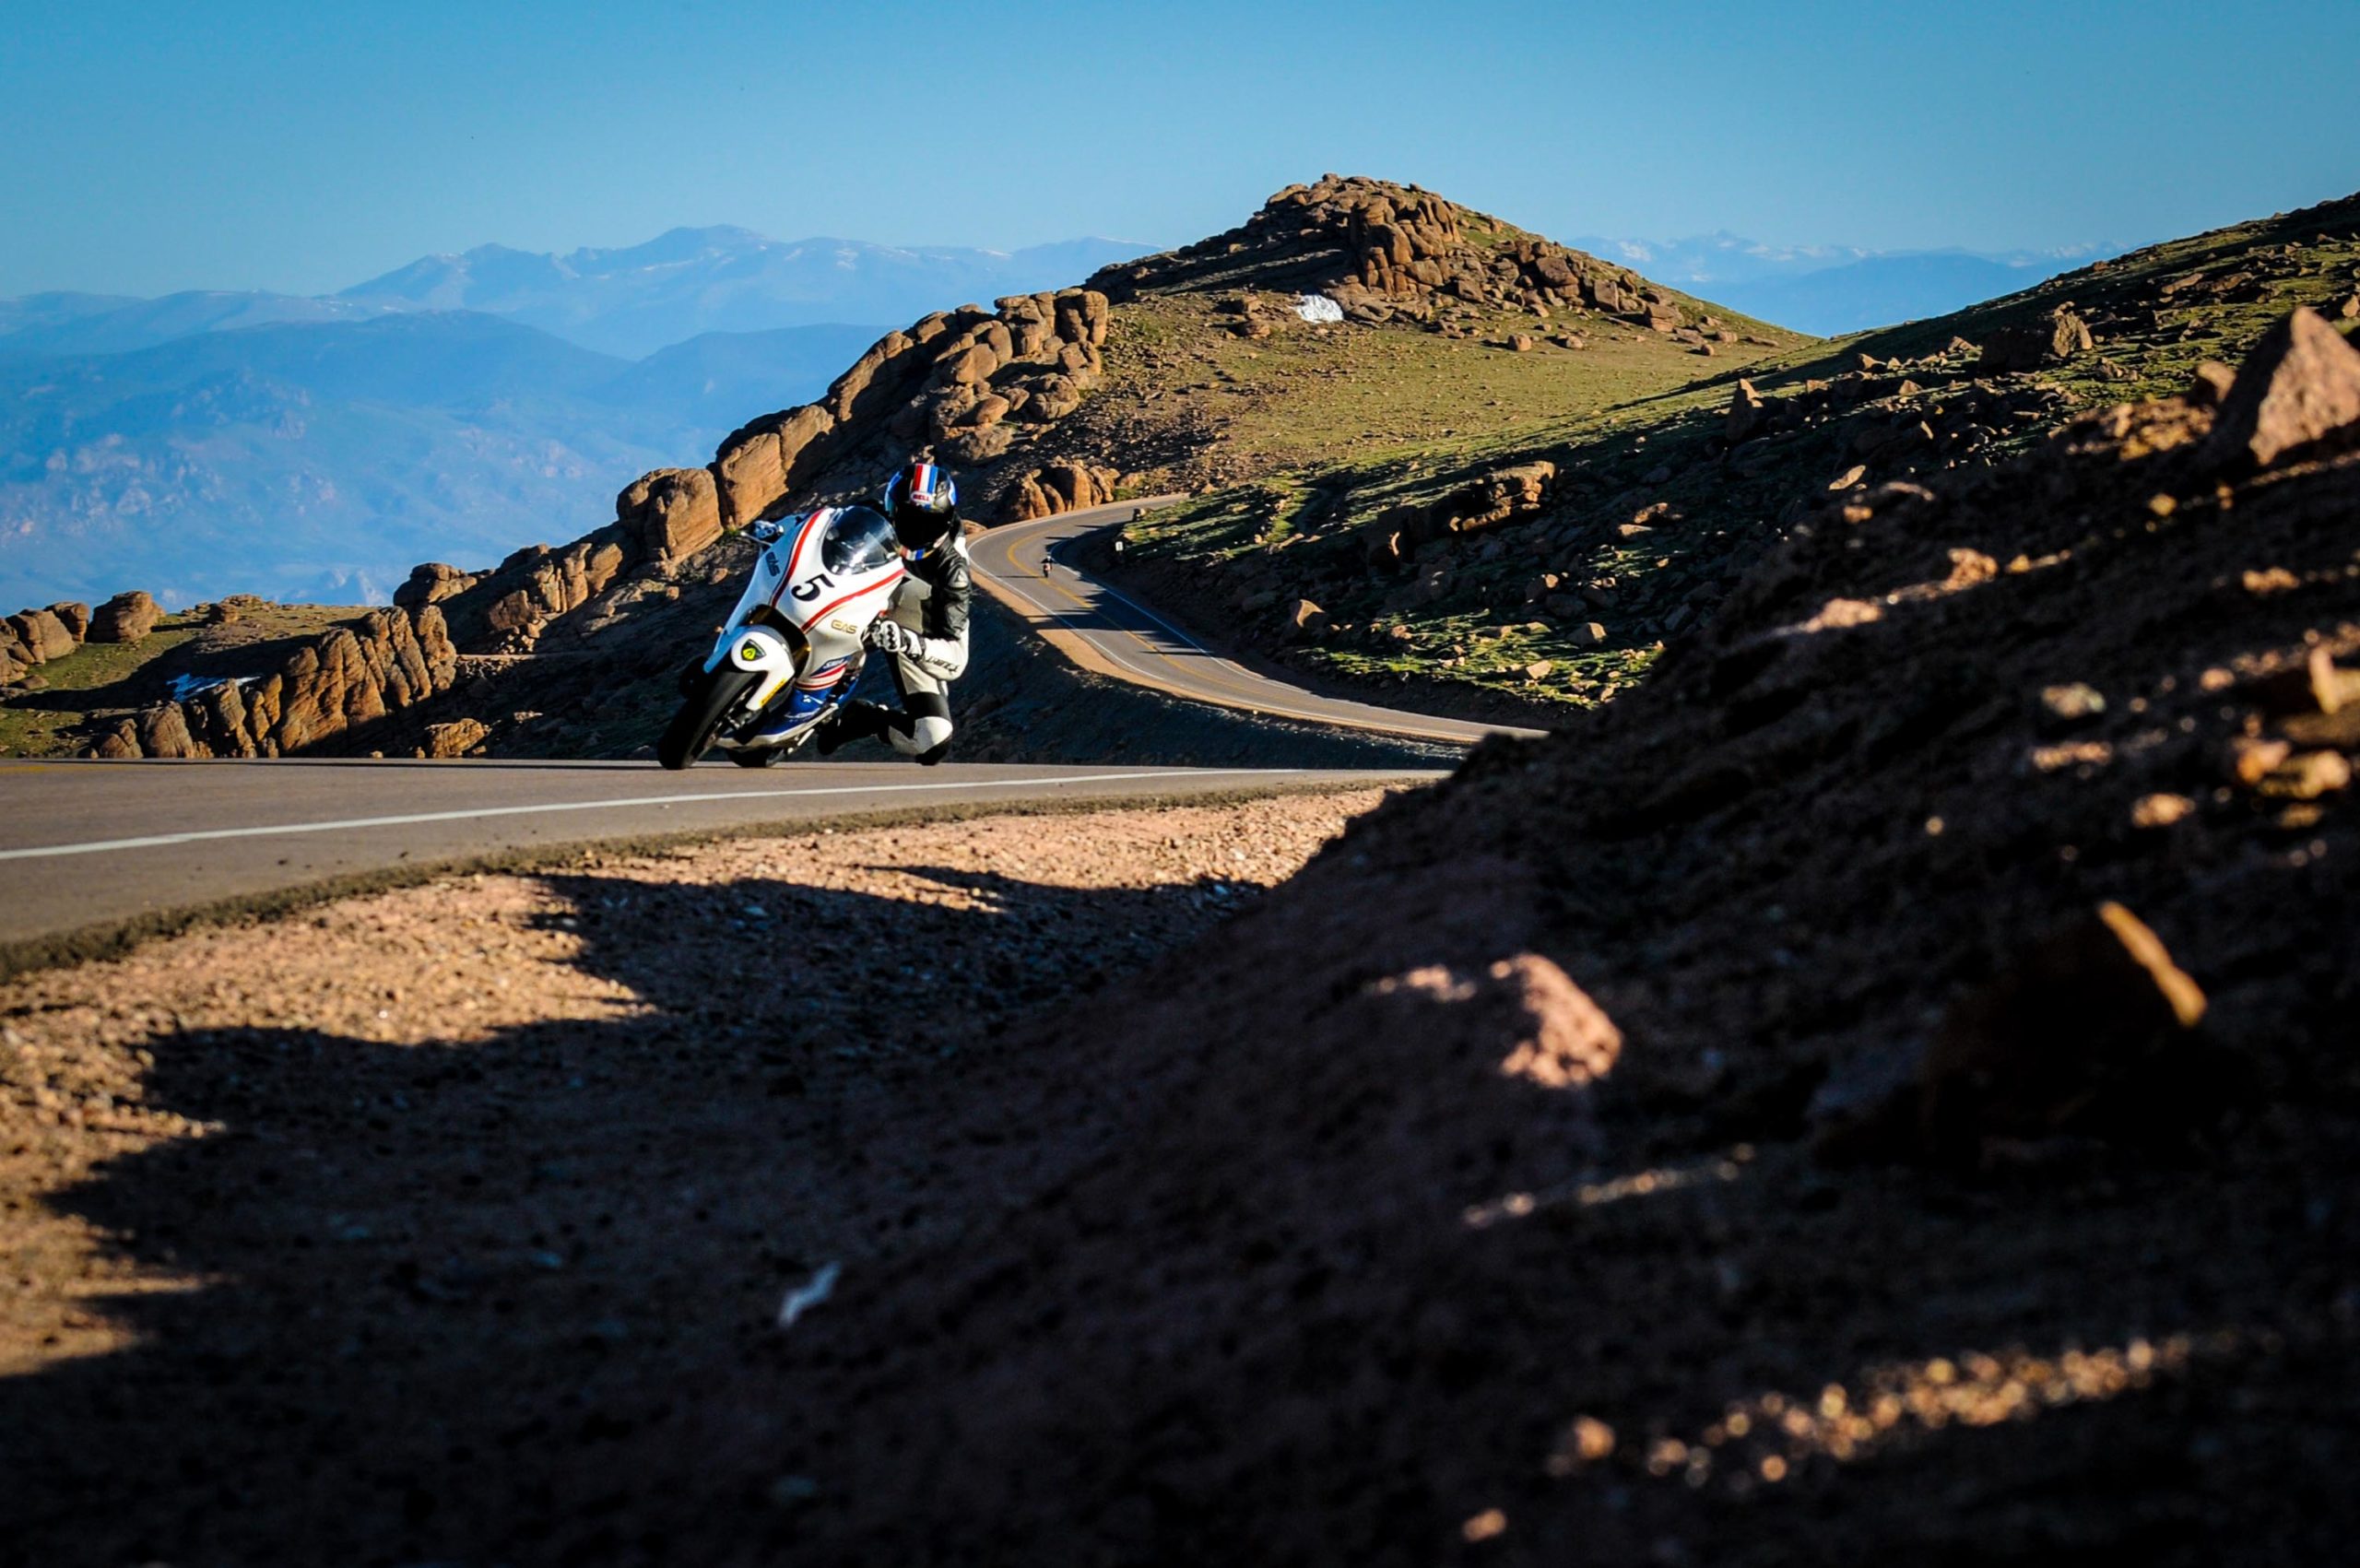 Pikes Peak International Hill Climb Formally Ends Motorcycle Racing